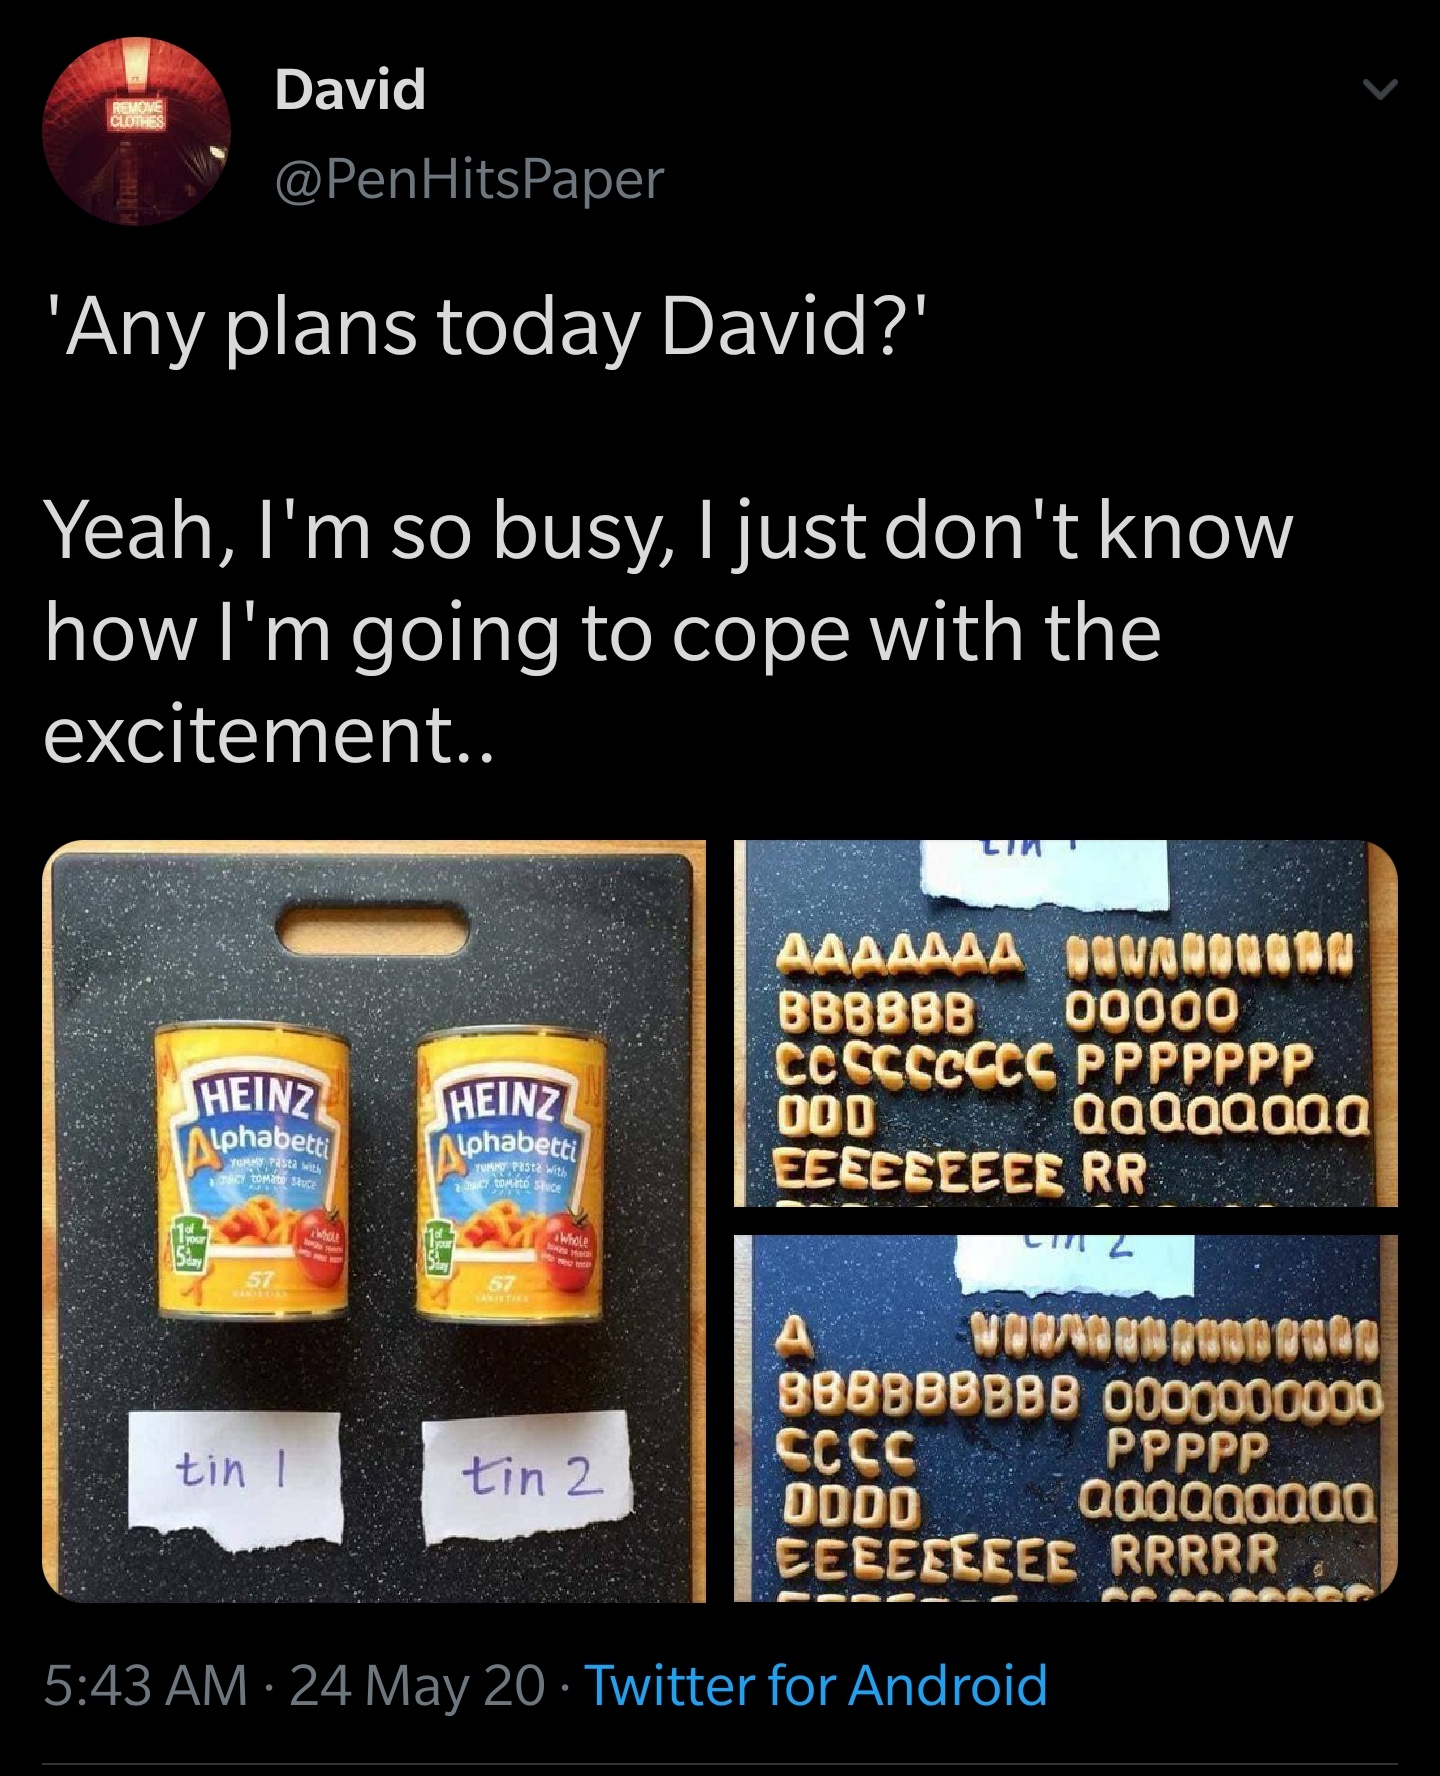 display advertising - David HitsPaper 'Any plans today David?' Yeah, I'm so busy, I just don't know how I'm going to cope with the excitement.. Heinz Alphabet 00000 Ccccccccc Ppppppp 000 aaaaaaaa Eeeeeeeee Rr Heinz pichabuit tin Wounds 8BBBBBBBB 000000000